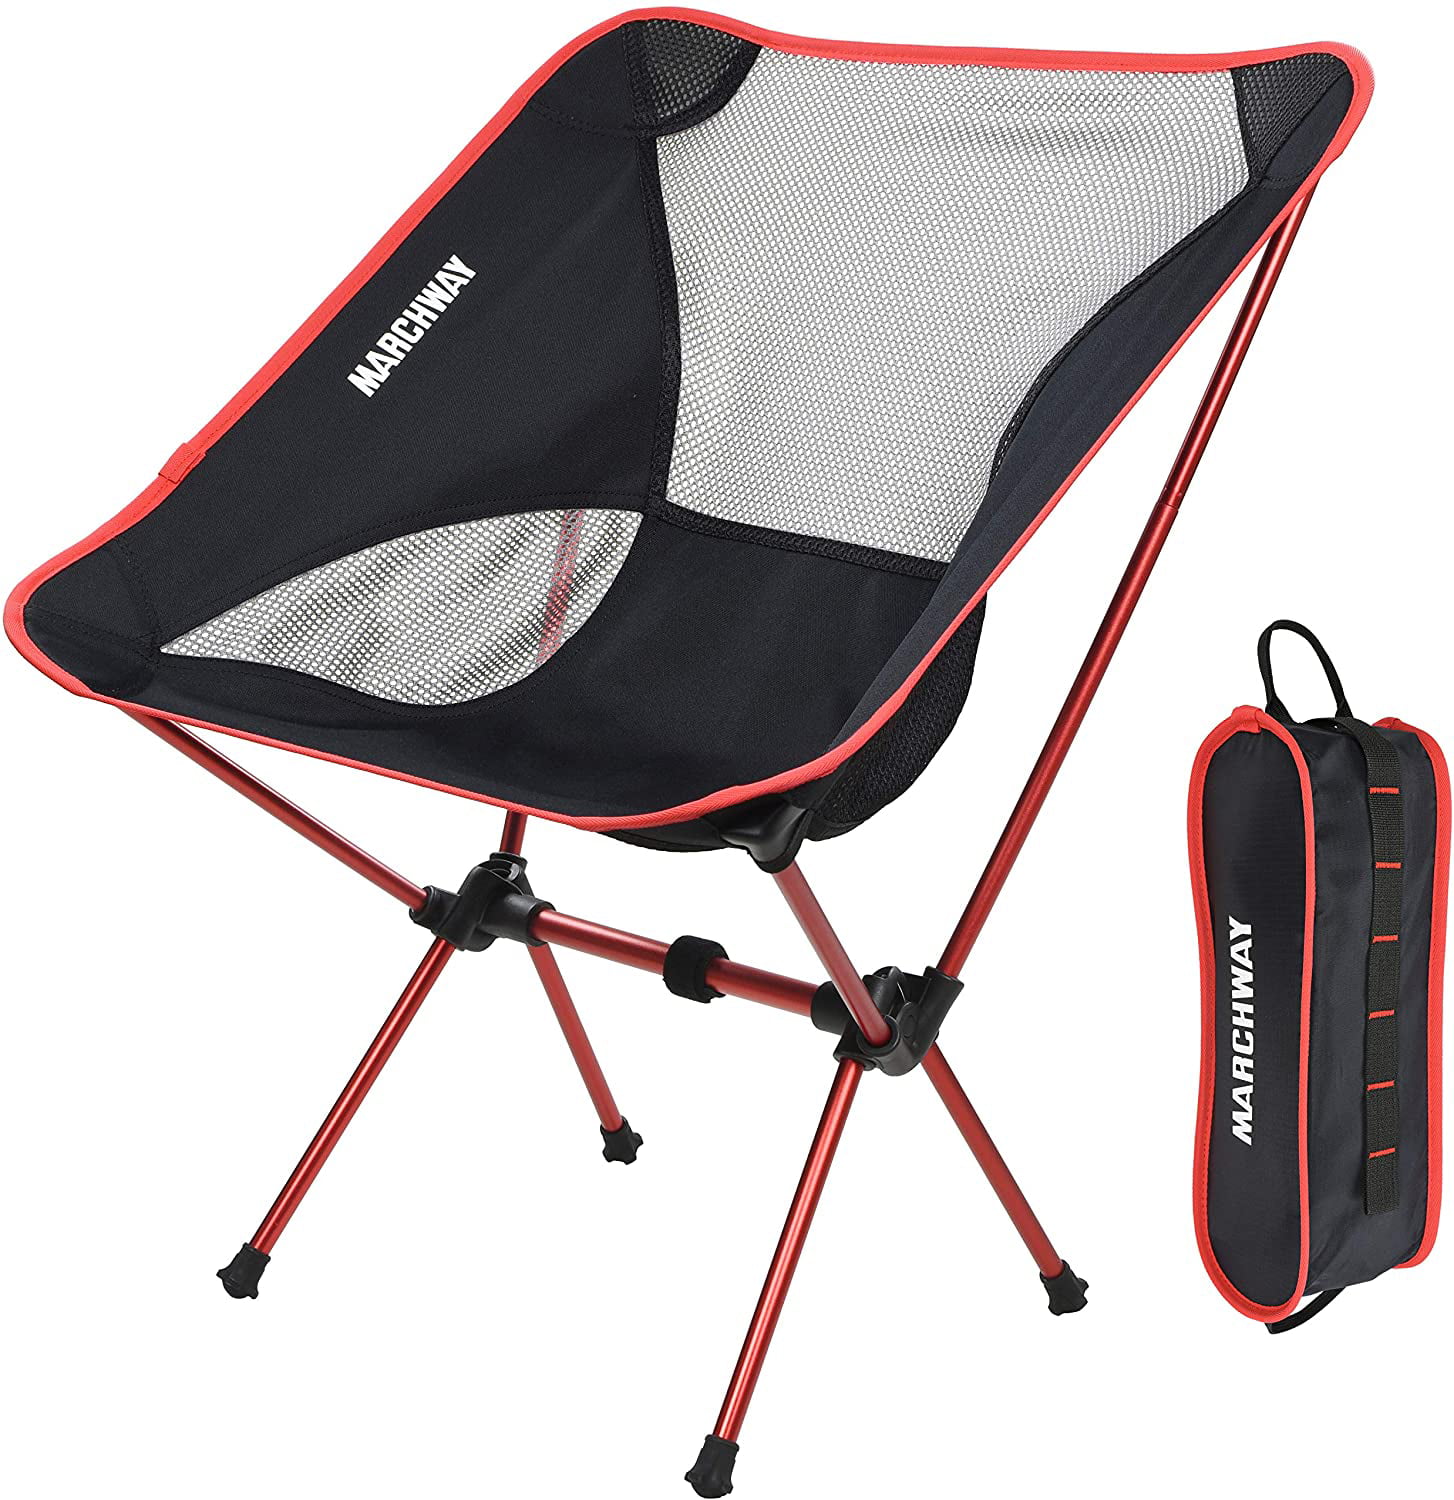 Decorx Ultralight Folding Camping Chair Portable Compact For Outdoor Camp Travel Beach